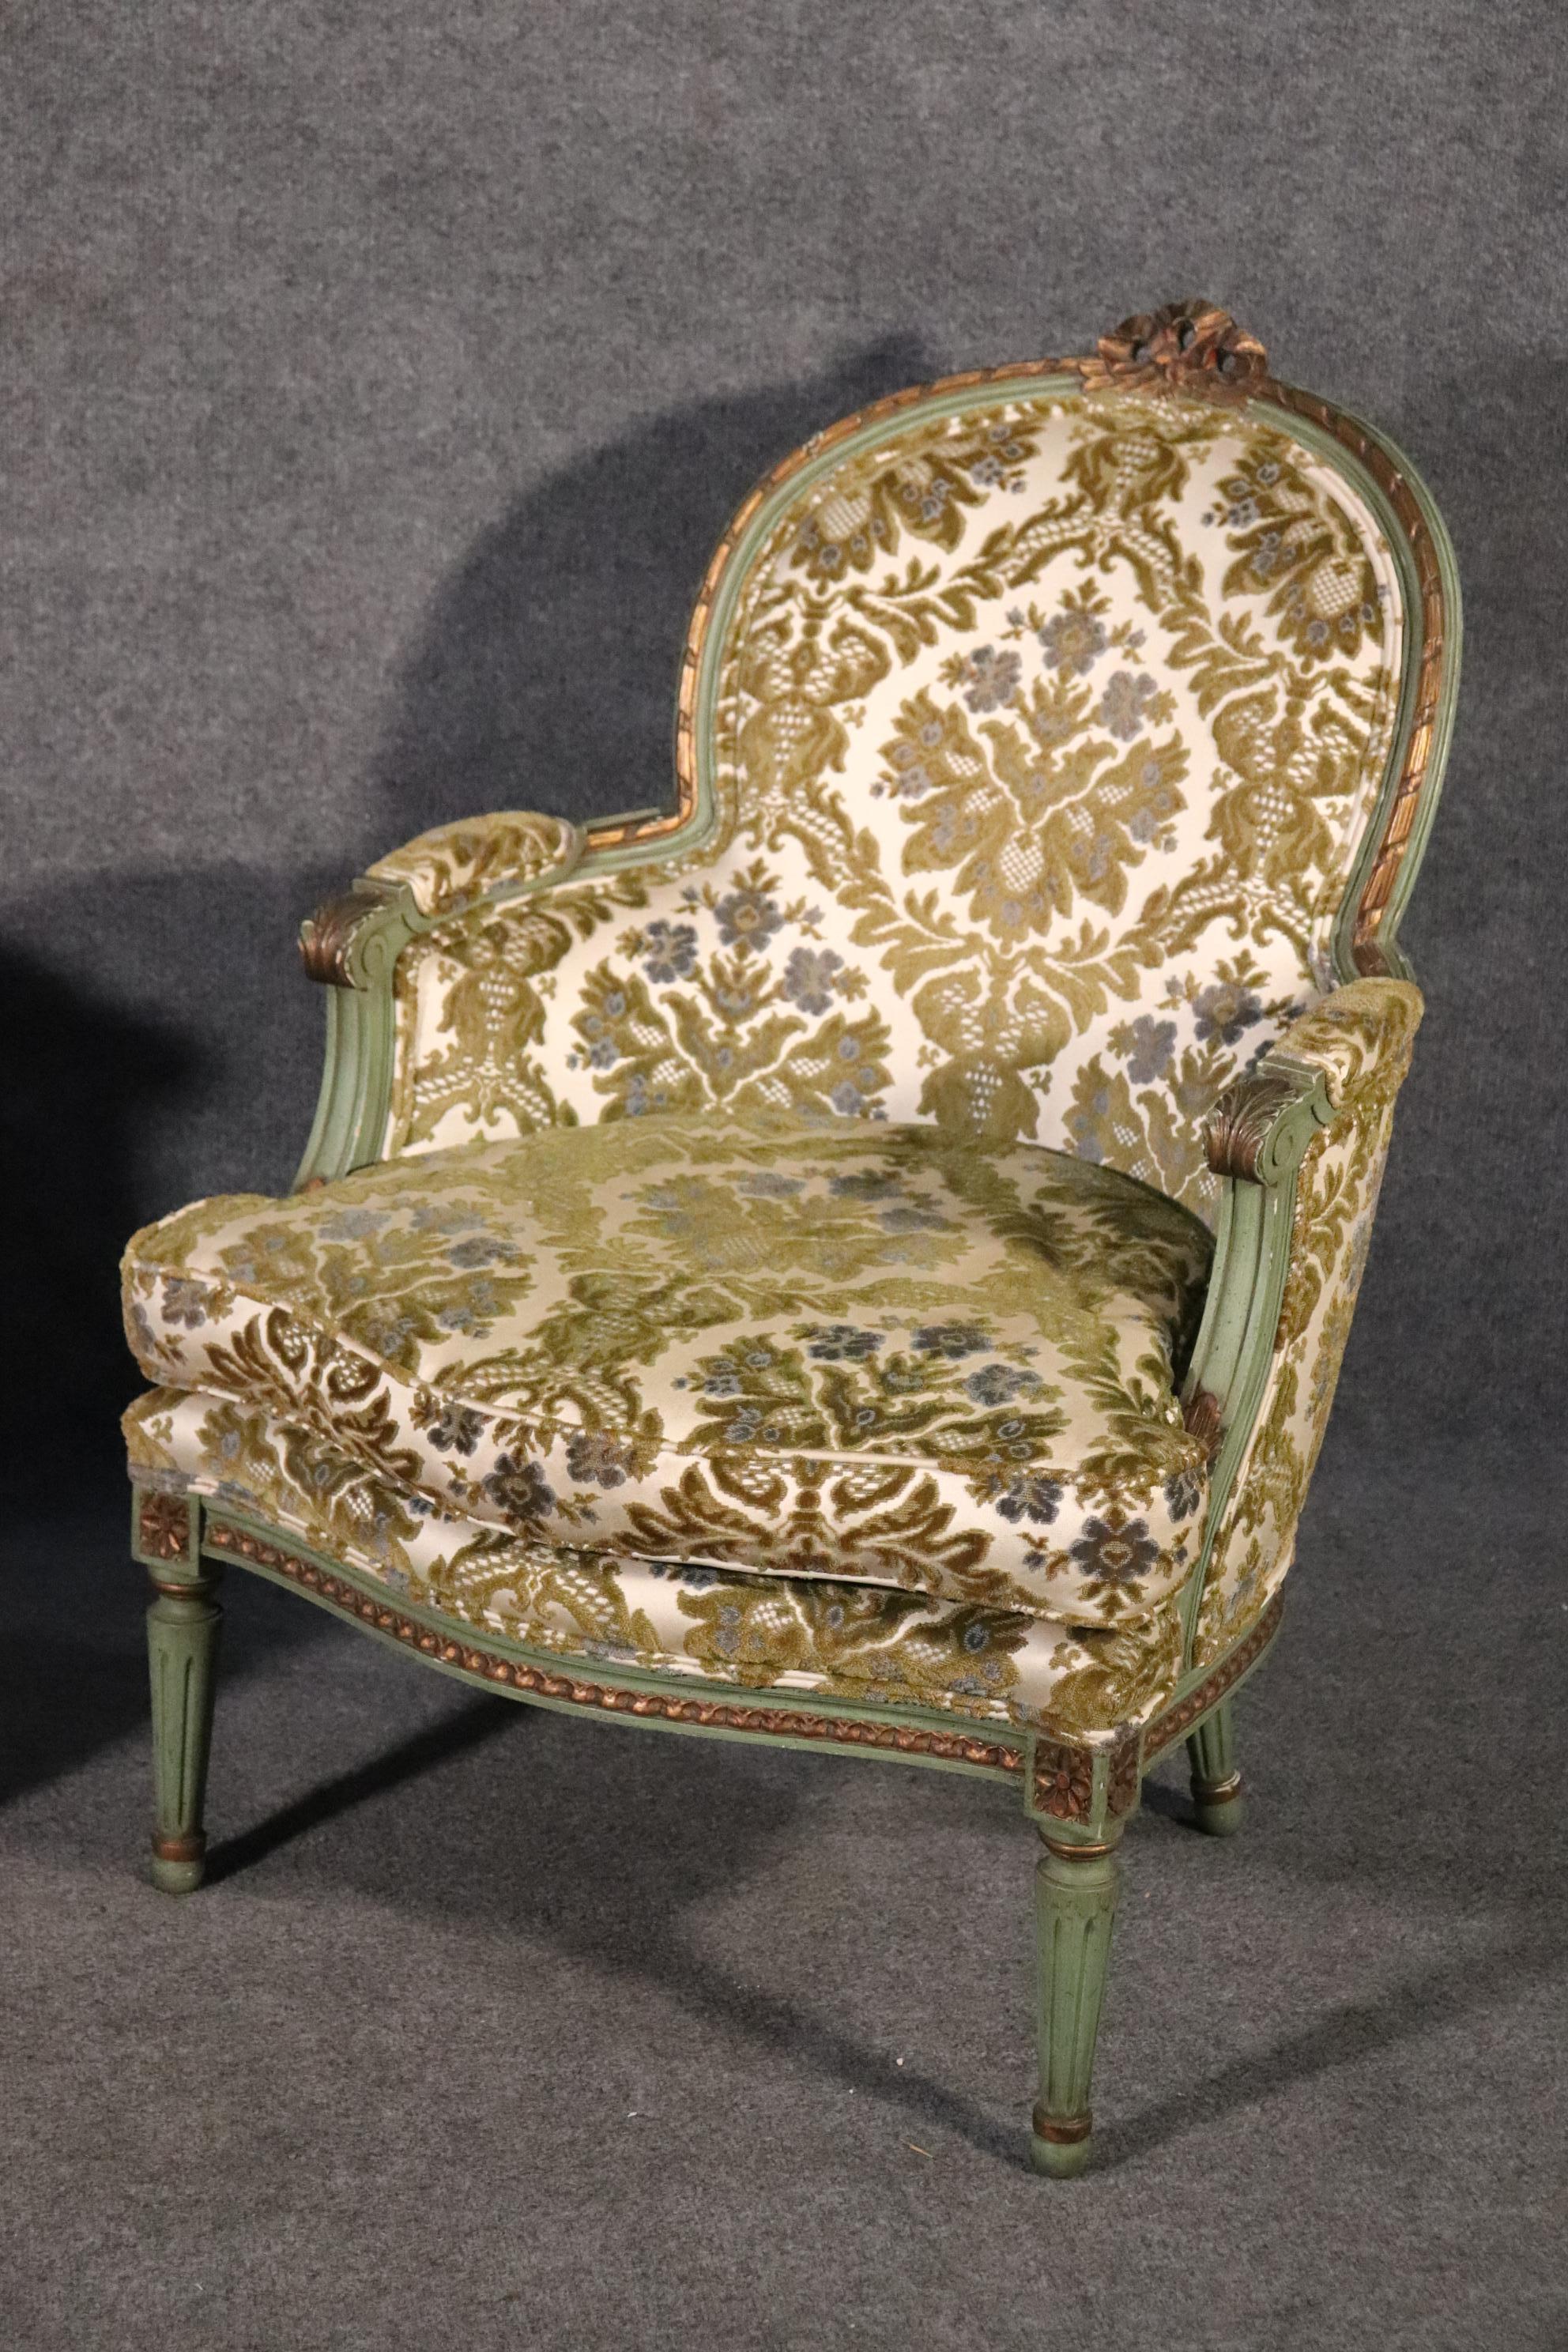 This is a gorgeous pair of French Louis XV bergeres with their original panited surfaces and upholstery. The chairs are in good condition and measure 38 tall x 27 wide x 29 deep deep and the seat height is 18 inches. The cushions will need the foam